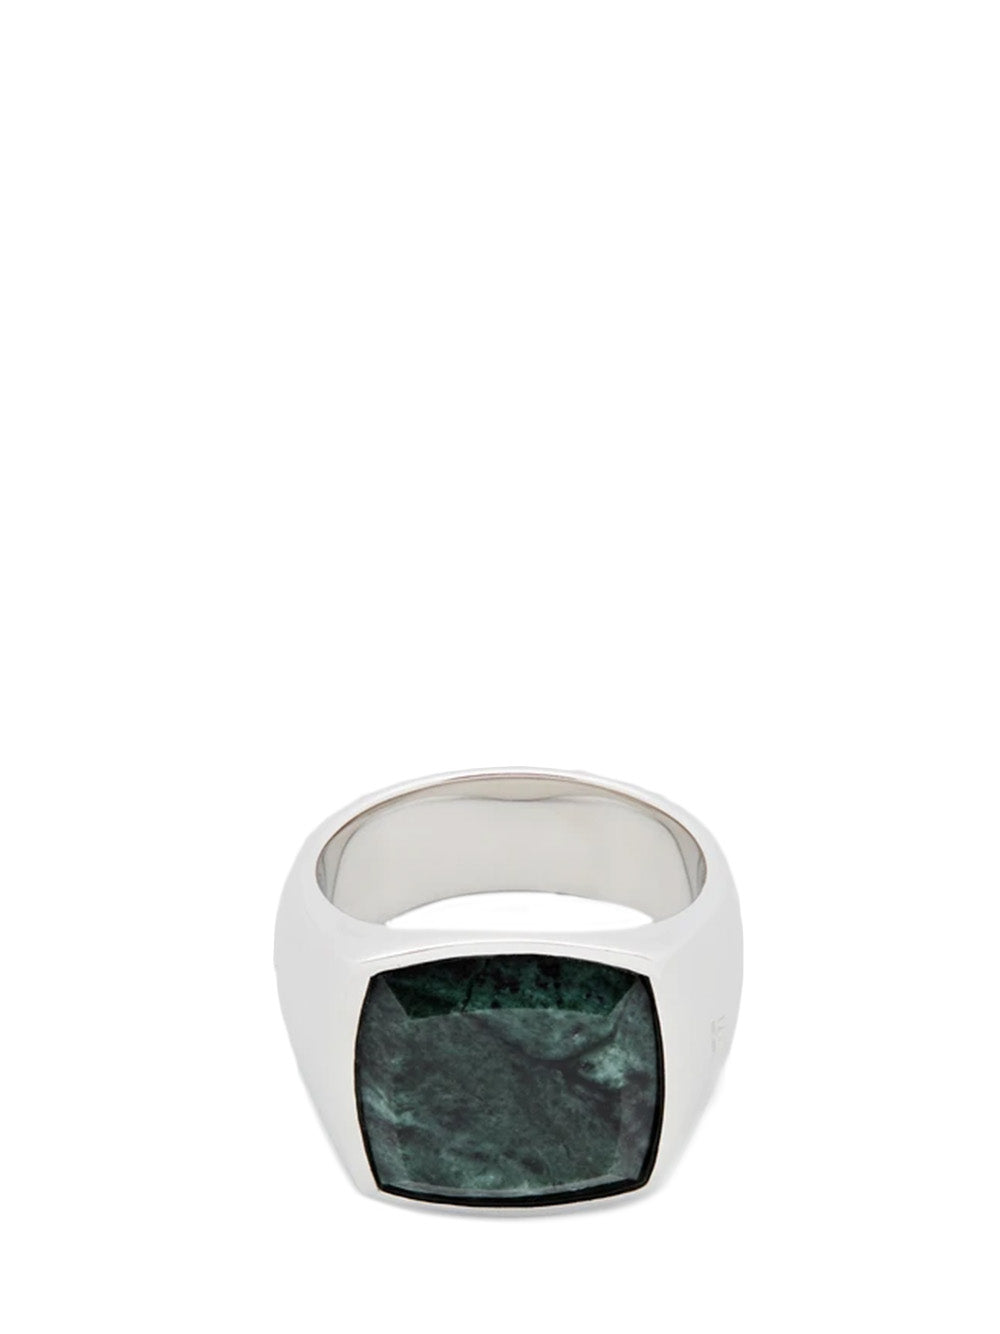     Tom-Wood-Cushion-Green-Marble-Ring-Silver-1